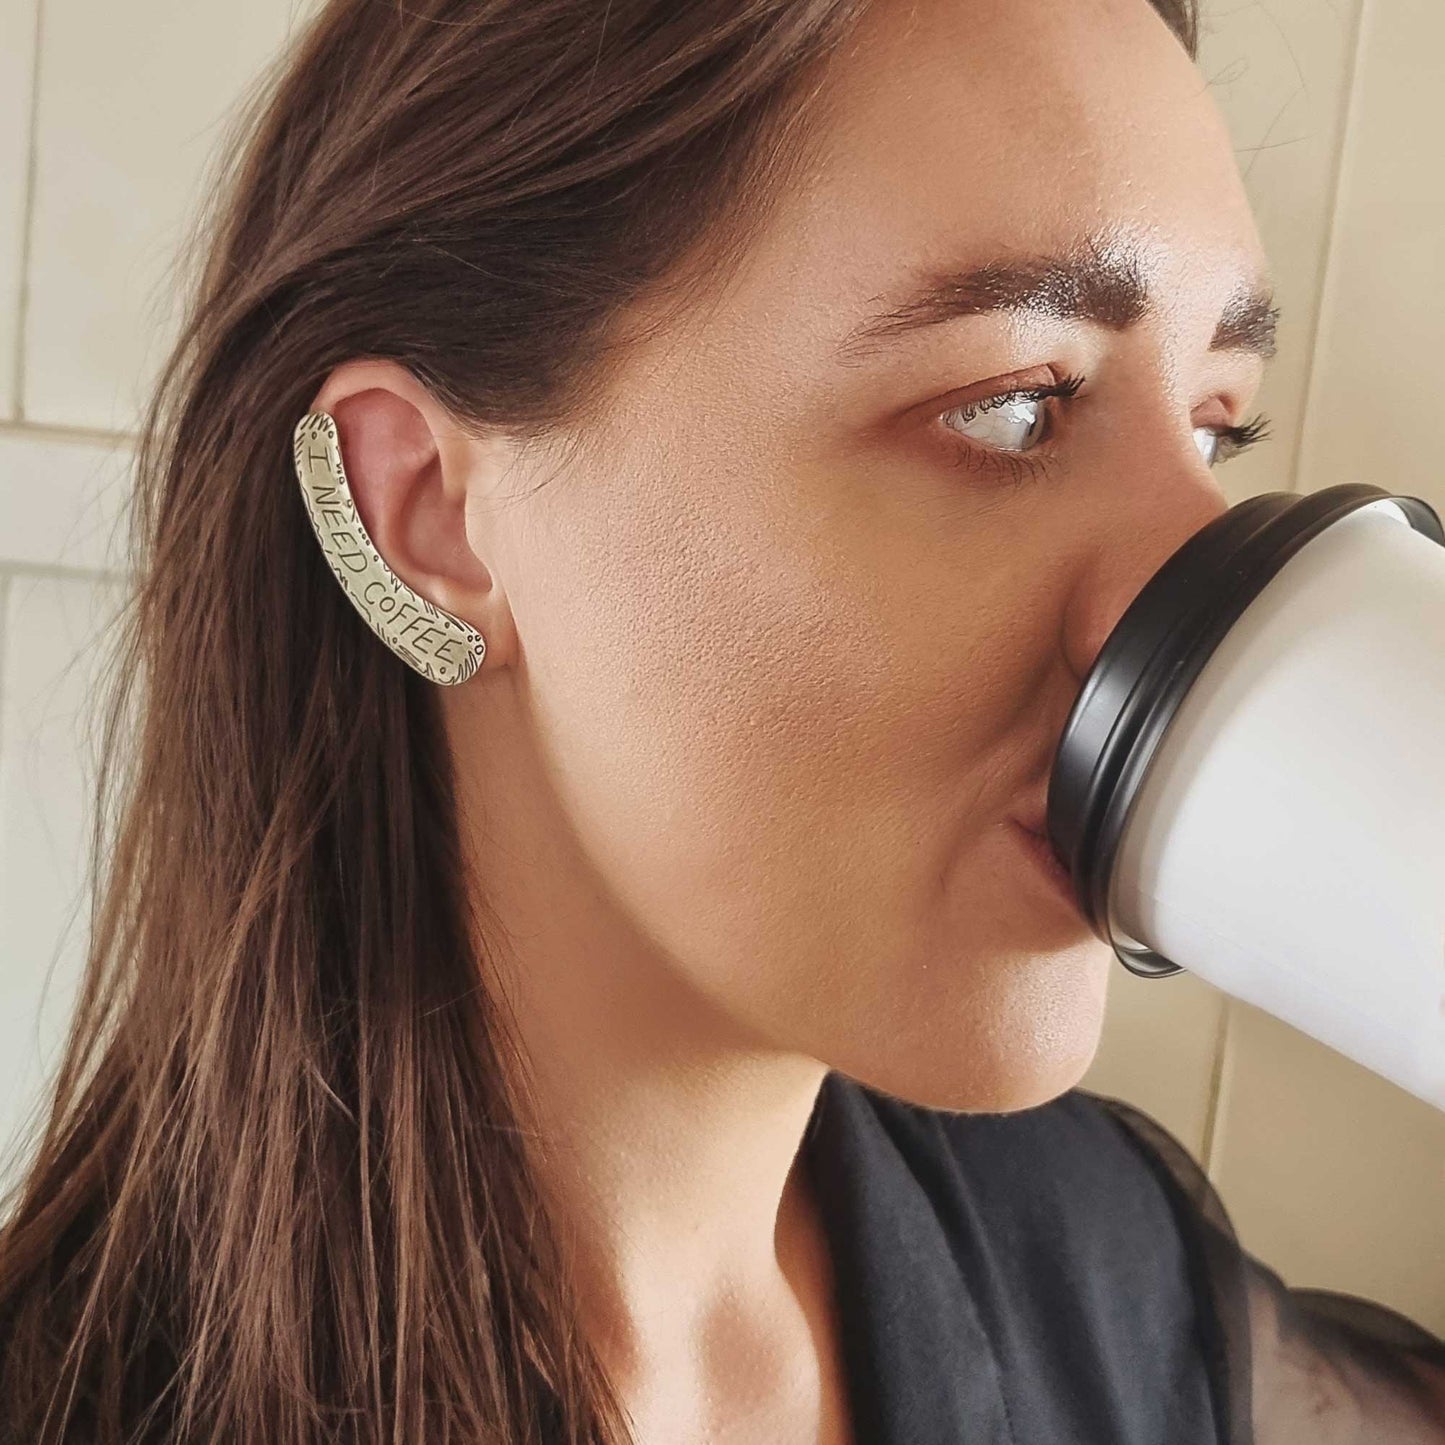 I NEED COFFEE Ear Cuff 🖤 SASS - A Collab Collection by Meekz Contemporary Jewellery x Sheridan Eveline